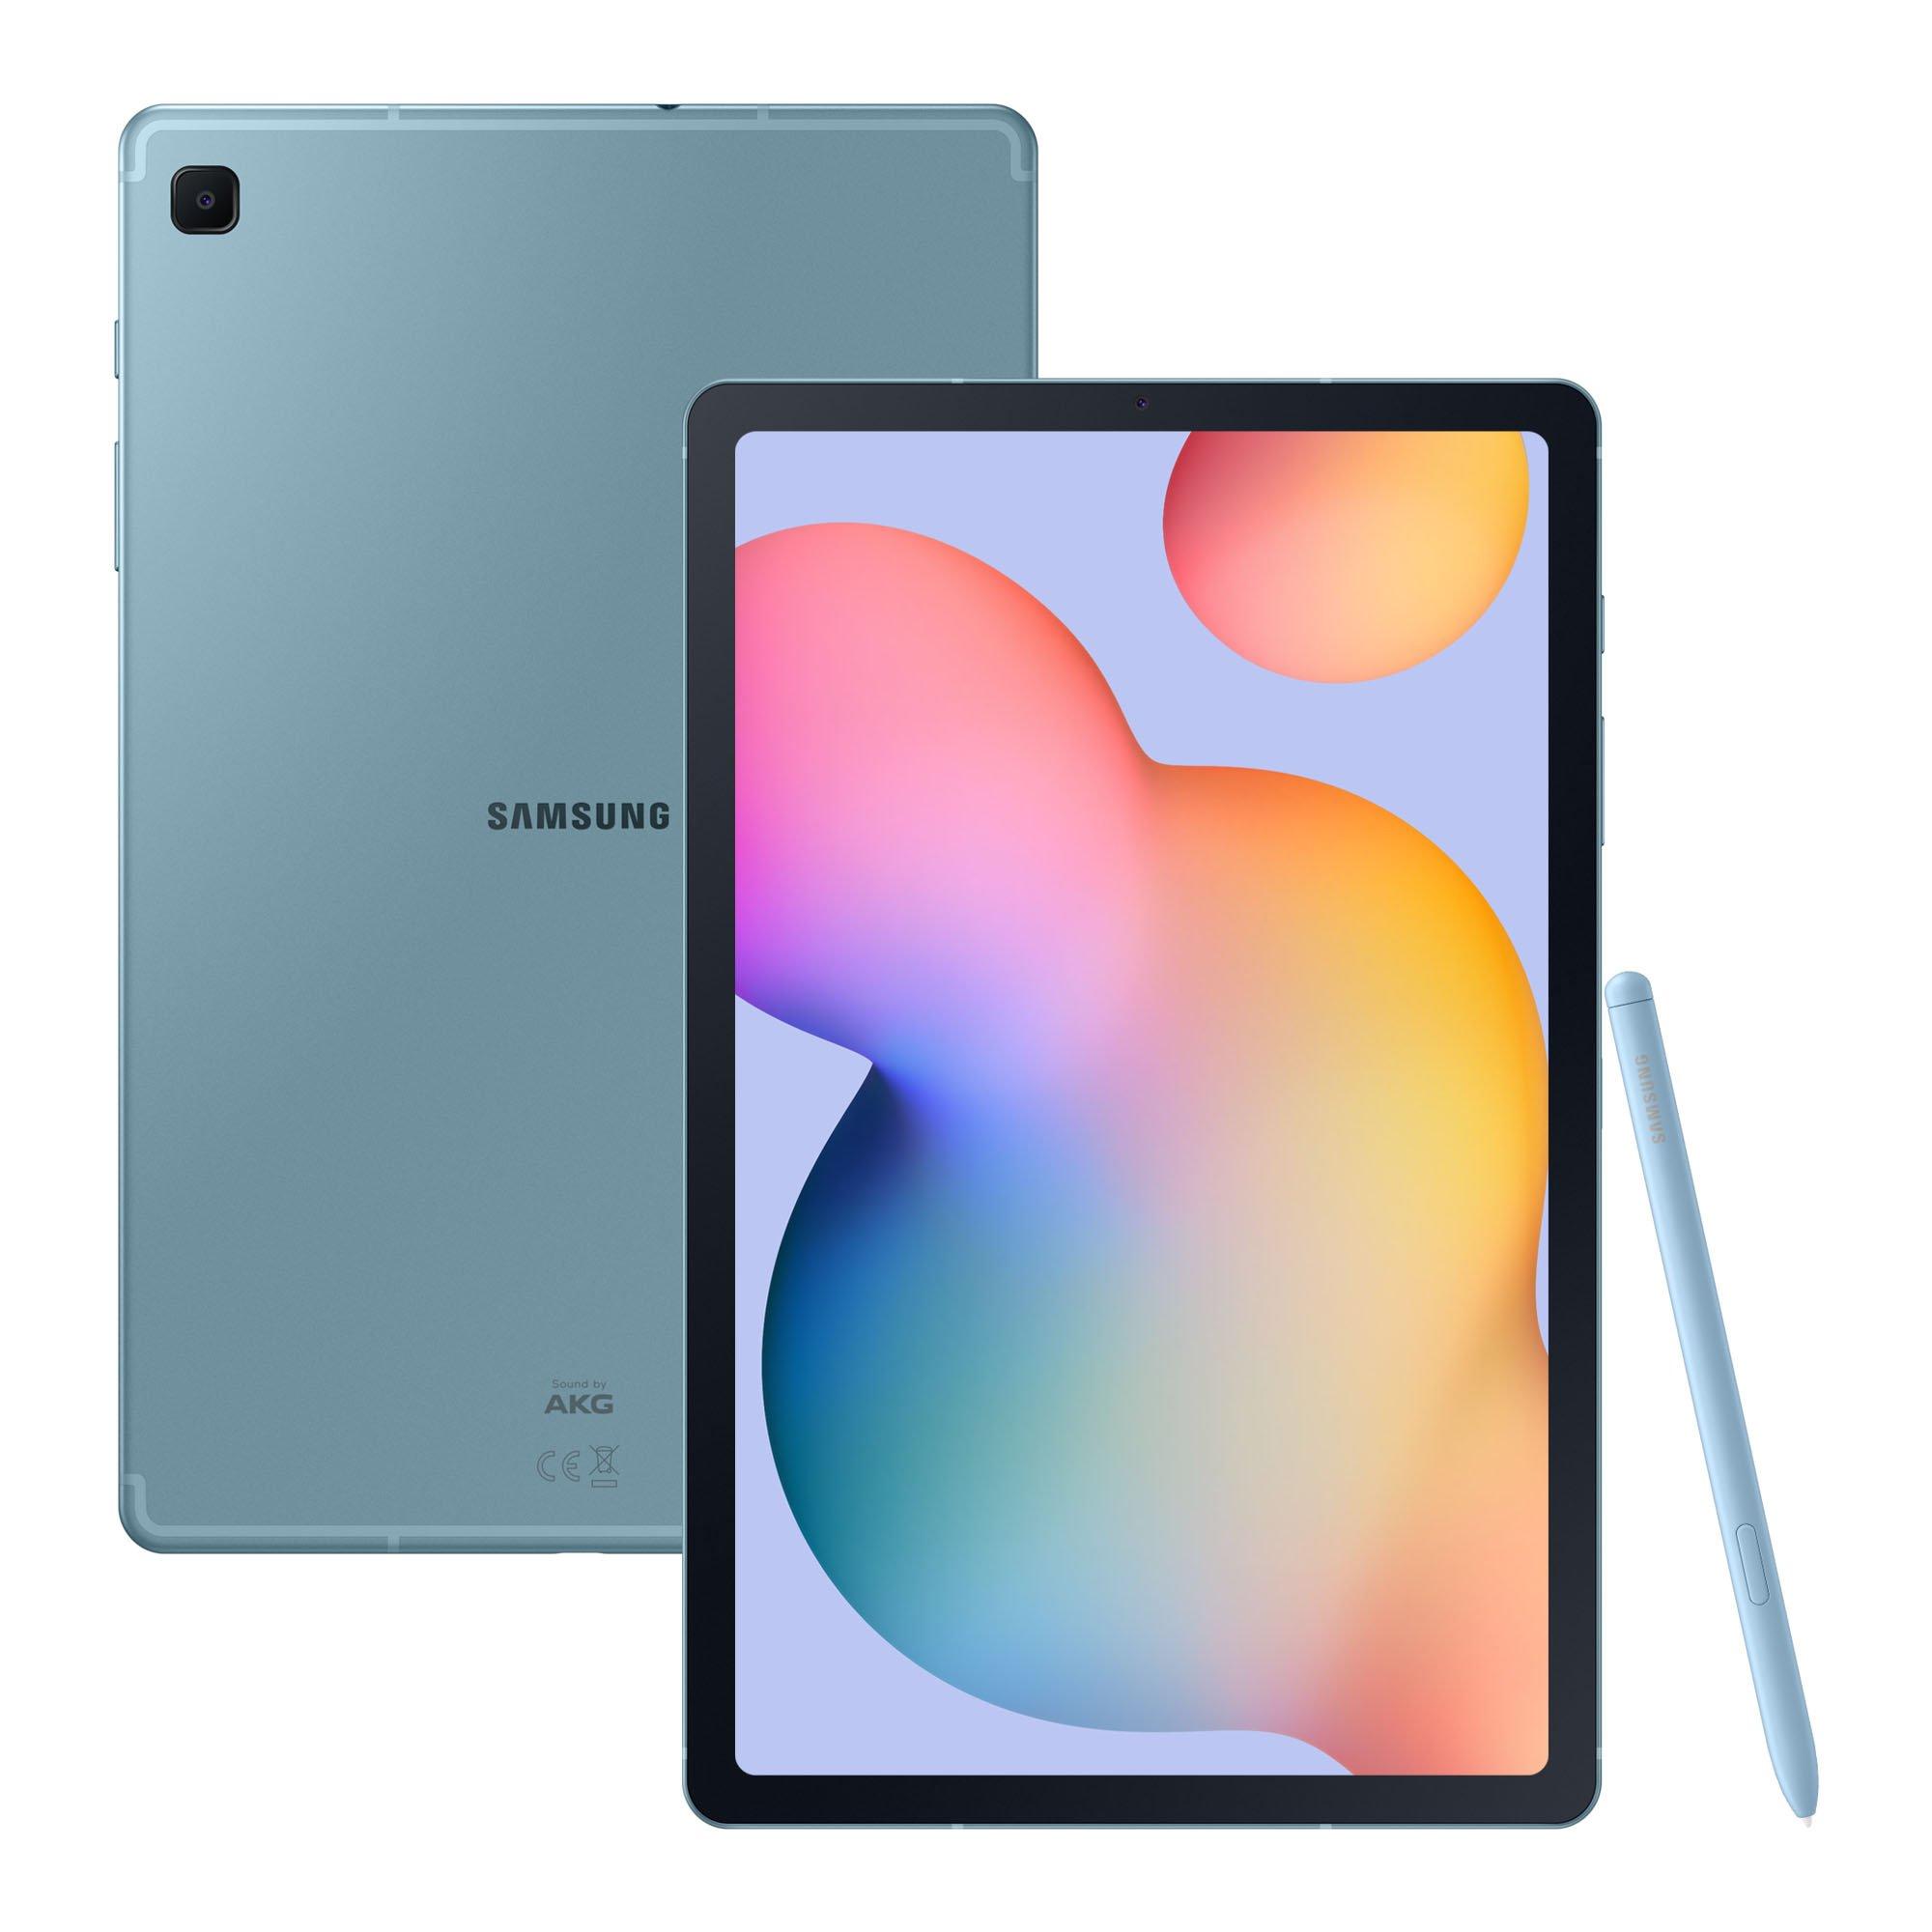 £329, SAMSUNG Galaxy Tab S6 Lite 10.4inch Tablet - 128 GB, Angora Blue, Android 10.0, Full HD screen, 128 GB storage: Perfect for saving pretty much everything, Add more storage with a microSD card, Battery life: Up to 13 hours, Dolby Atmos, 